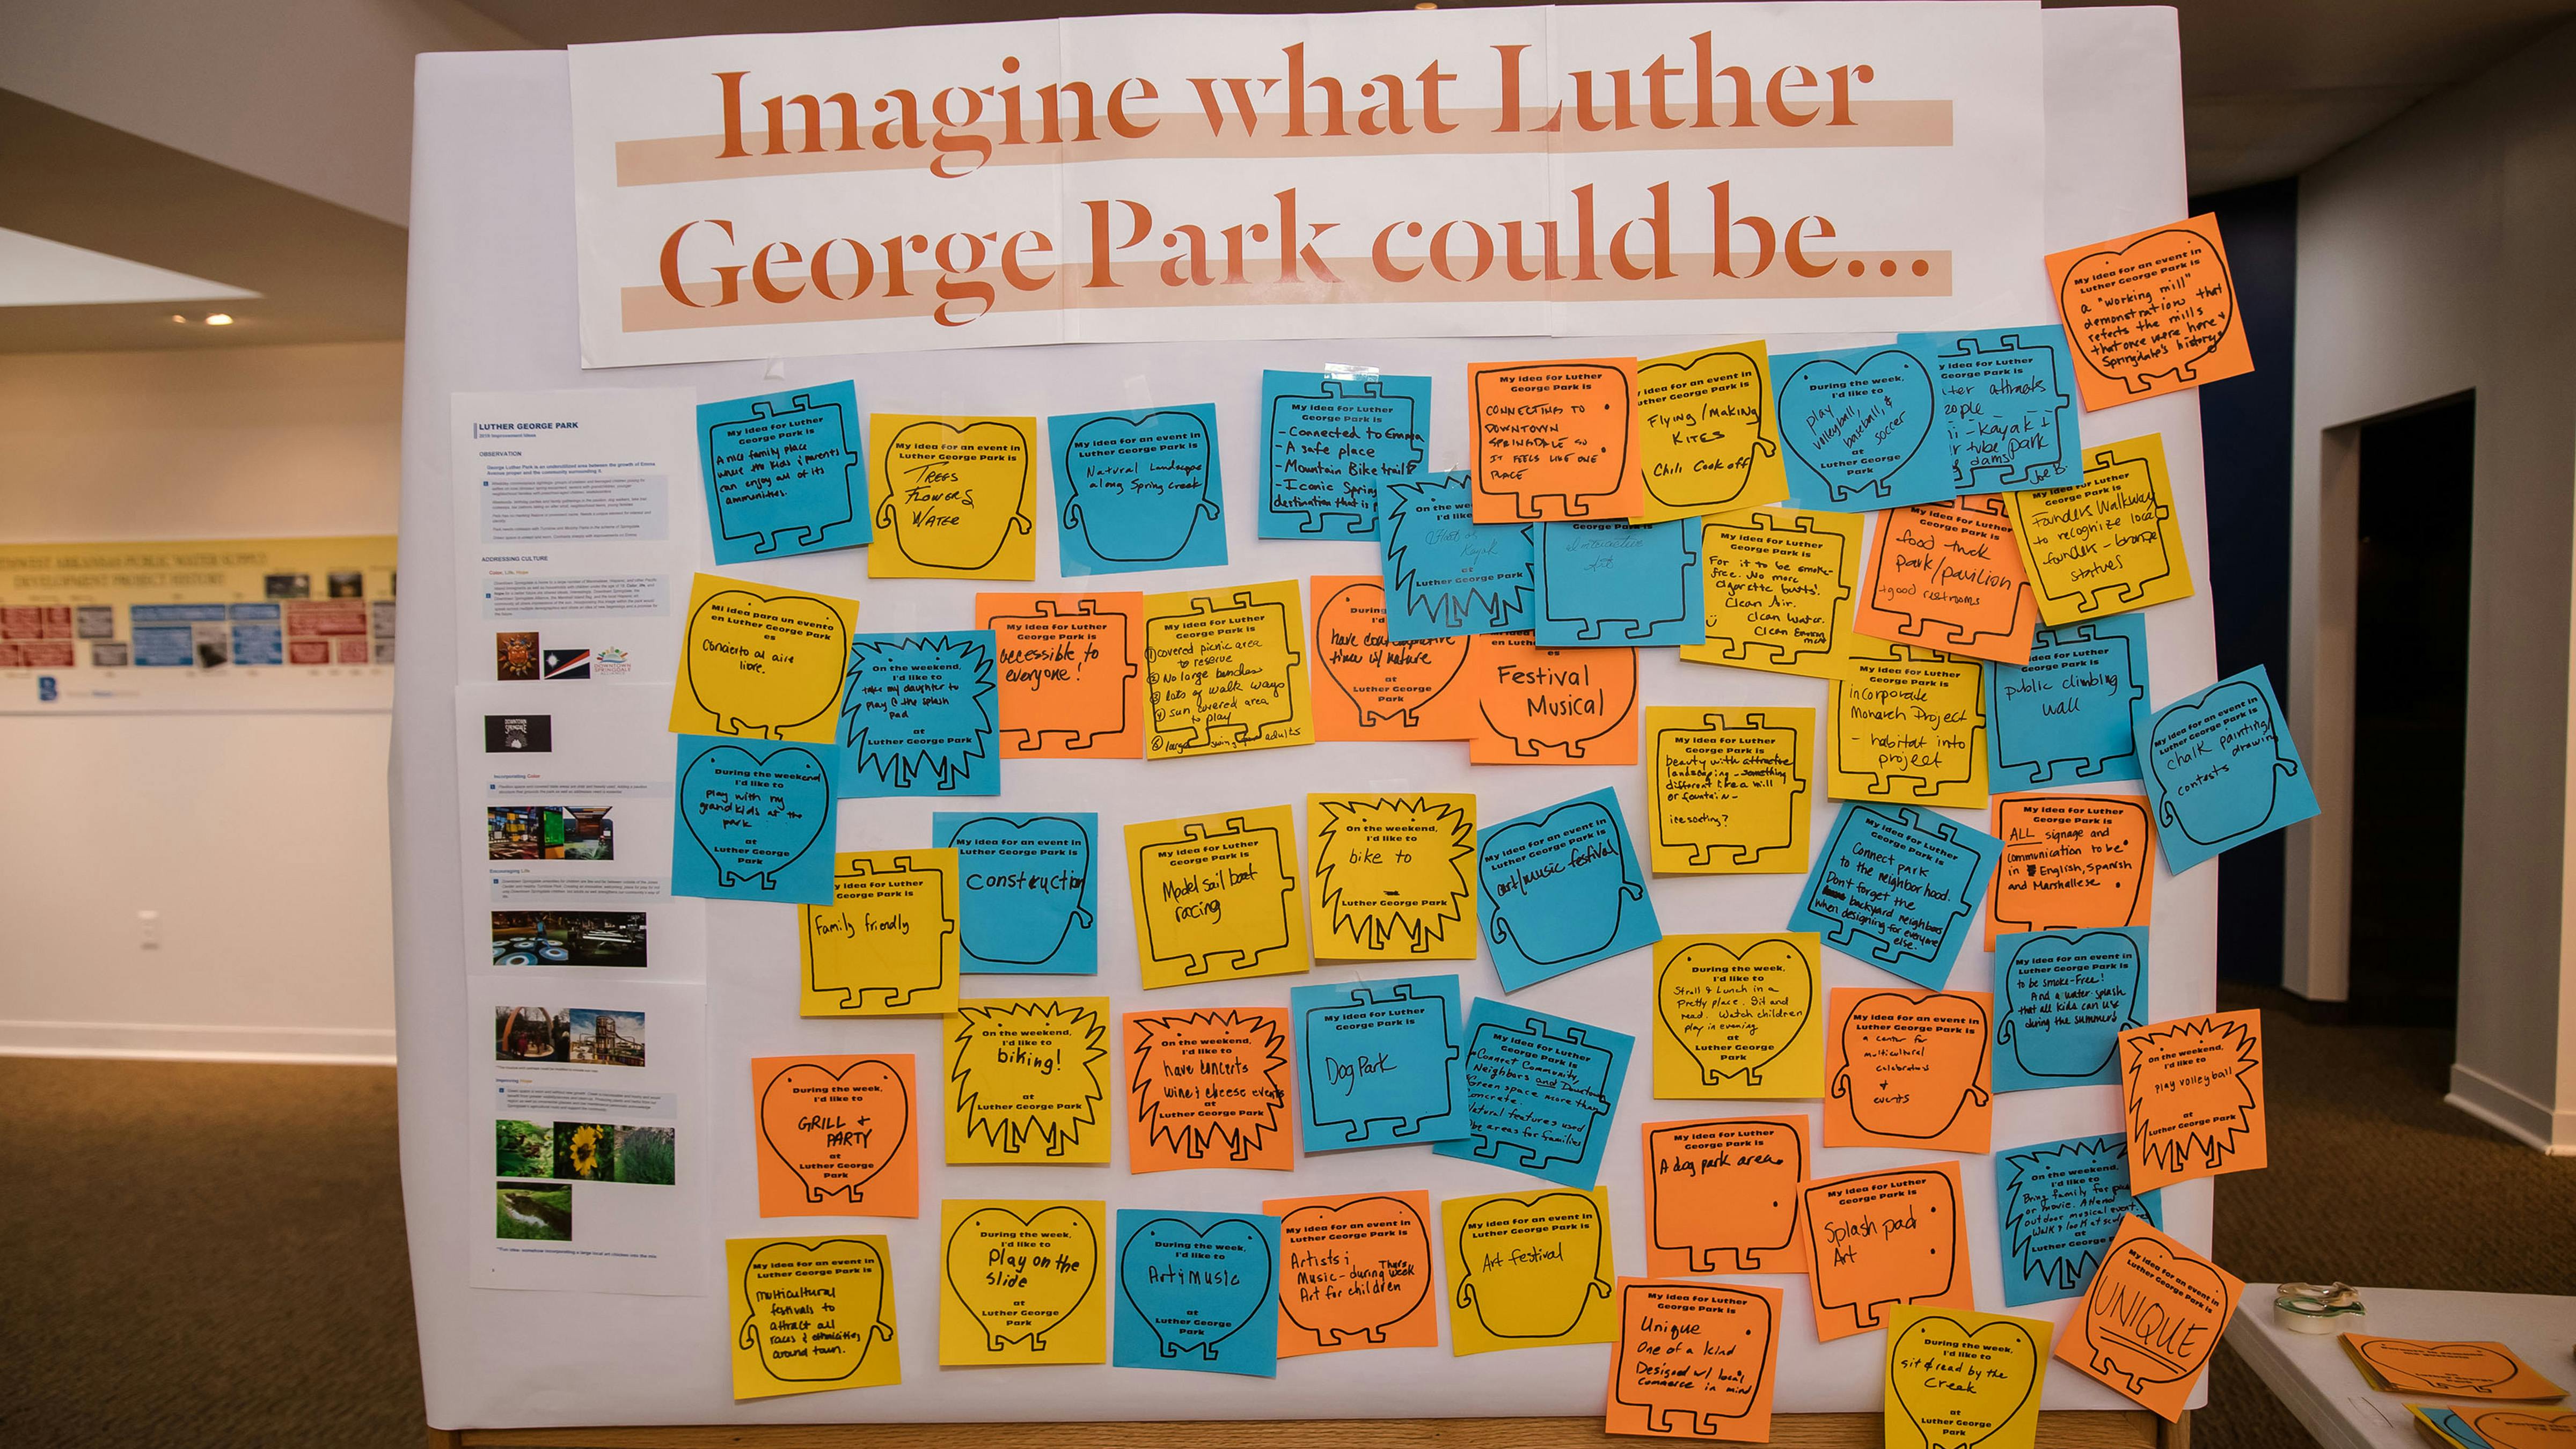 Photograph of panel filled with sticky notes from community, providing feedback of visions for what the park could be.